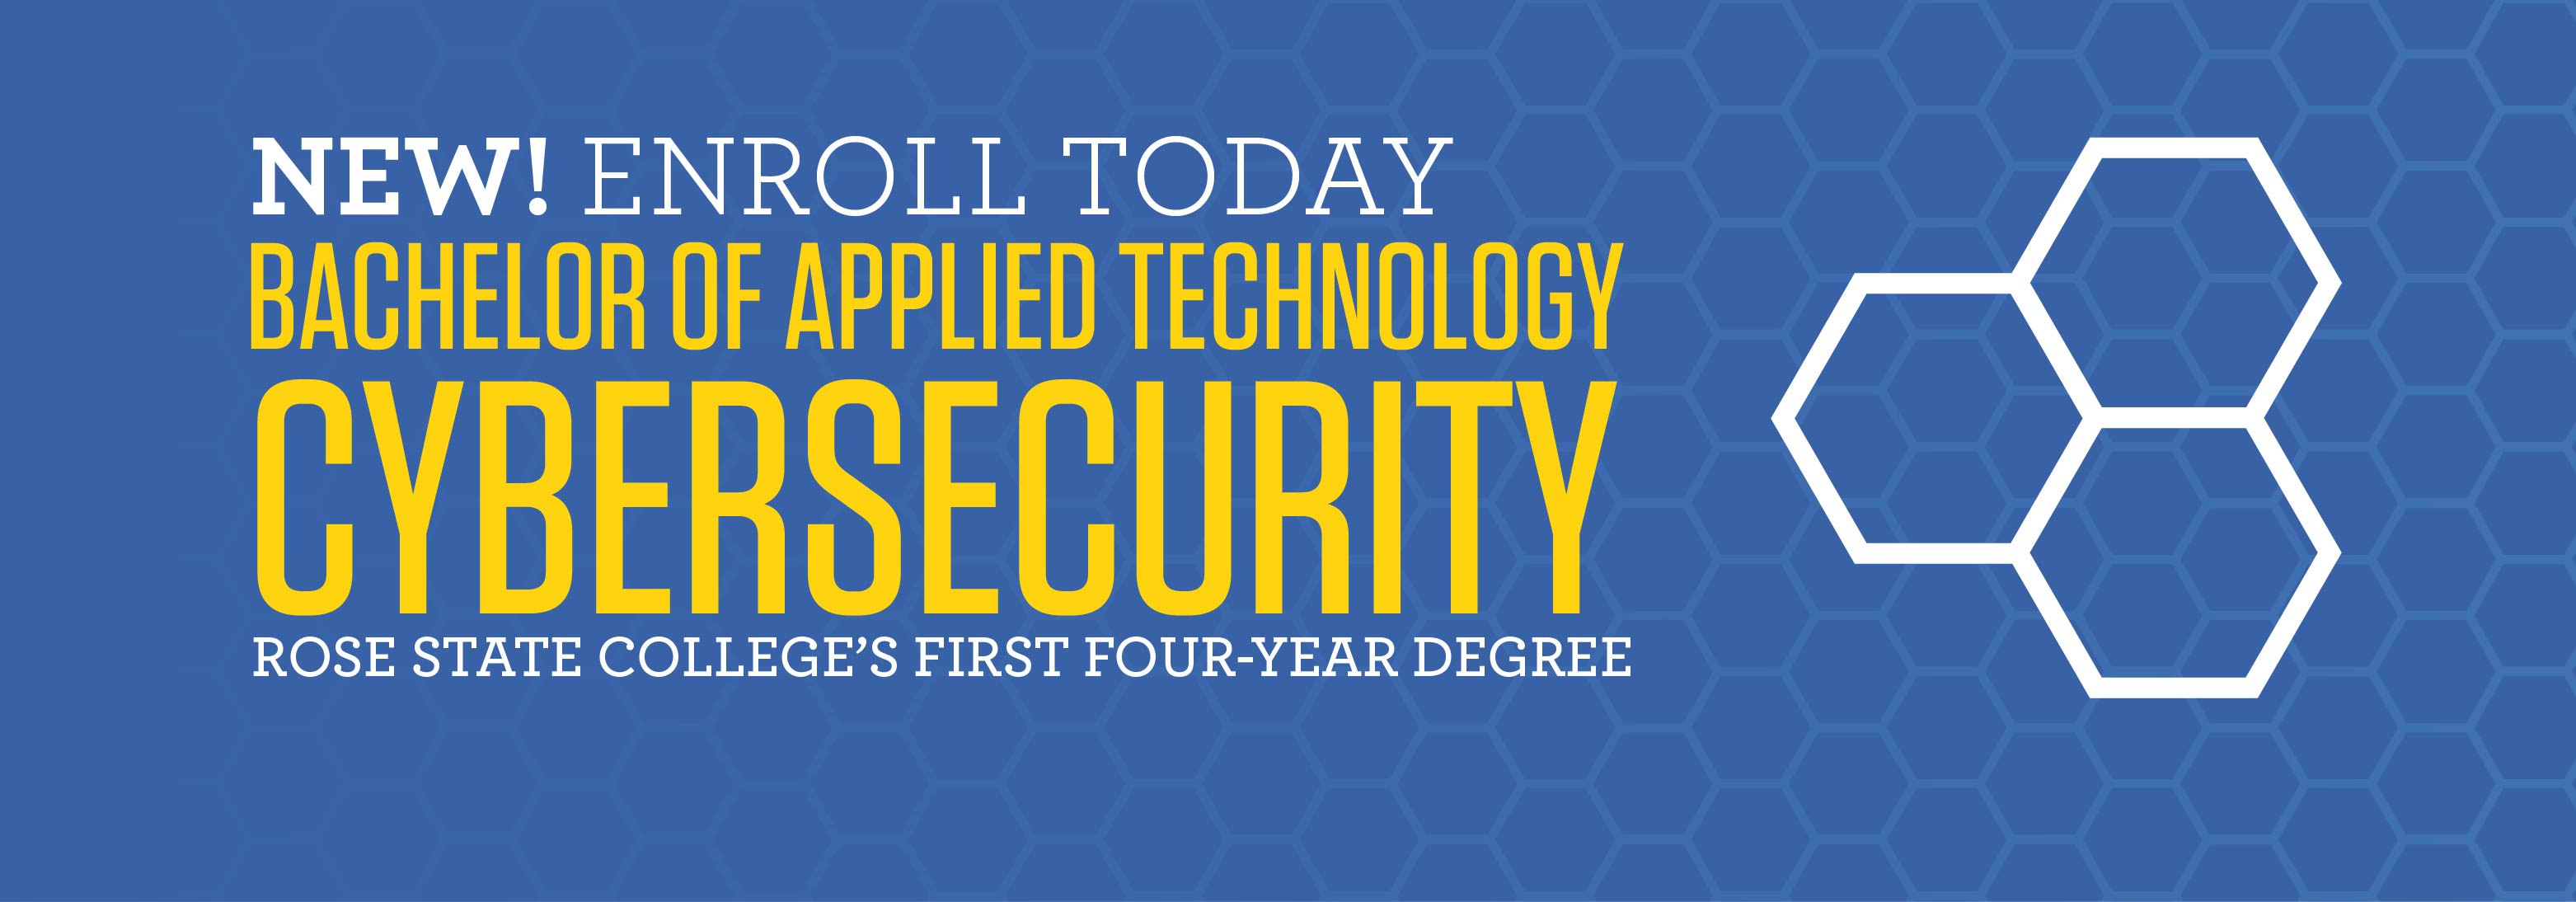 NEW! ENROLL TODAY BACHELOR OF APPLIED TECHNOLOGY CYBERSECURITY ROSE STATE COLLEGE'S FIRST FOUR-YEAR DEGREE